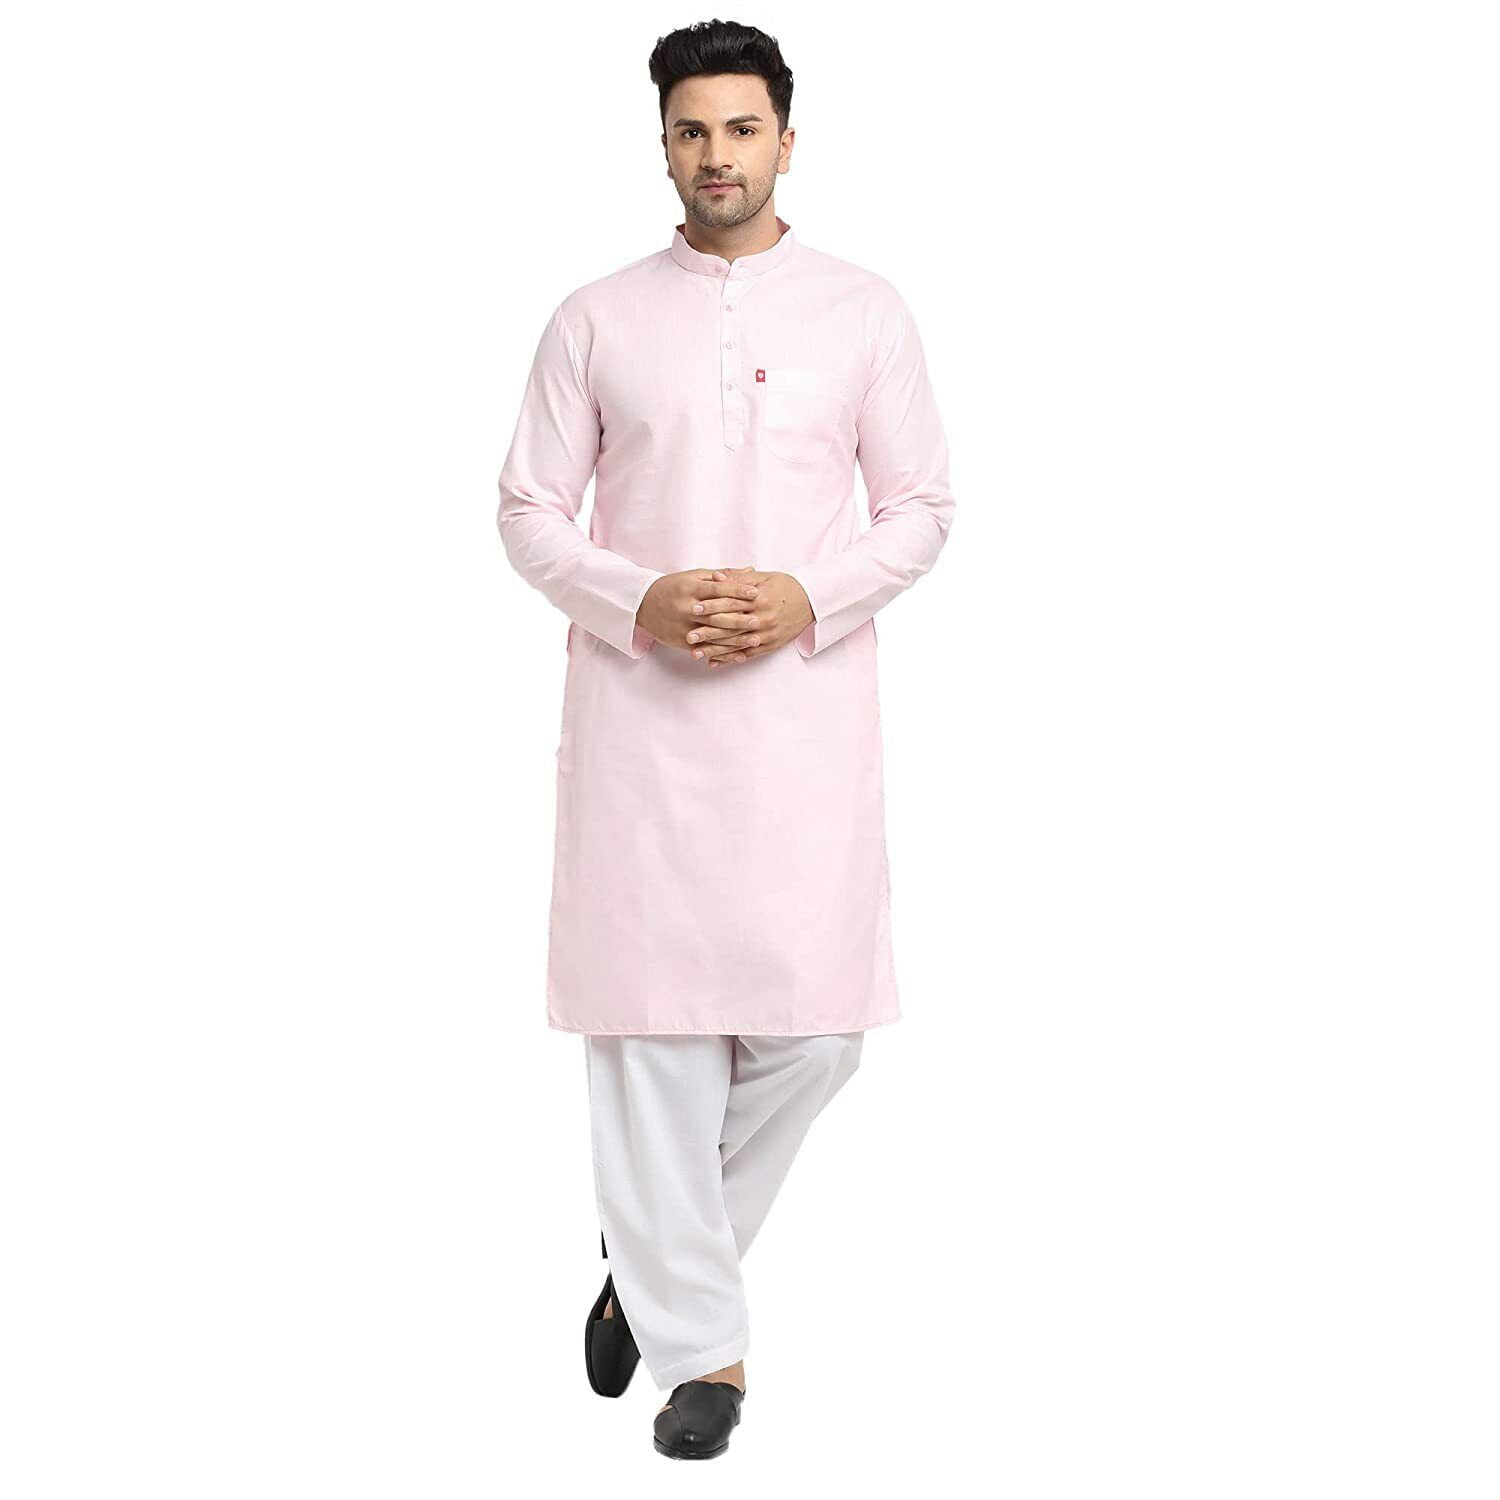 Buy Latest Pathani Suit For Men Online in India at G3fashion